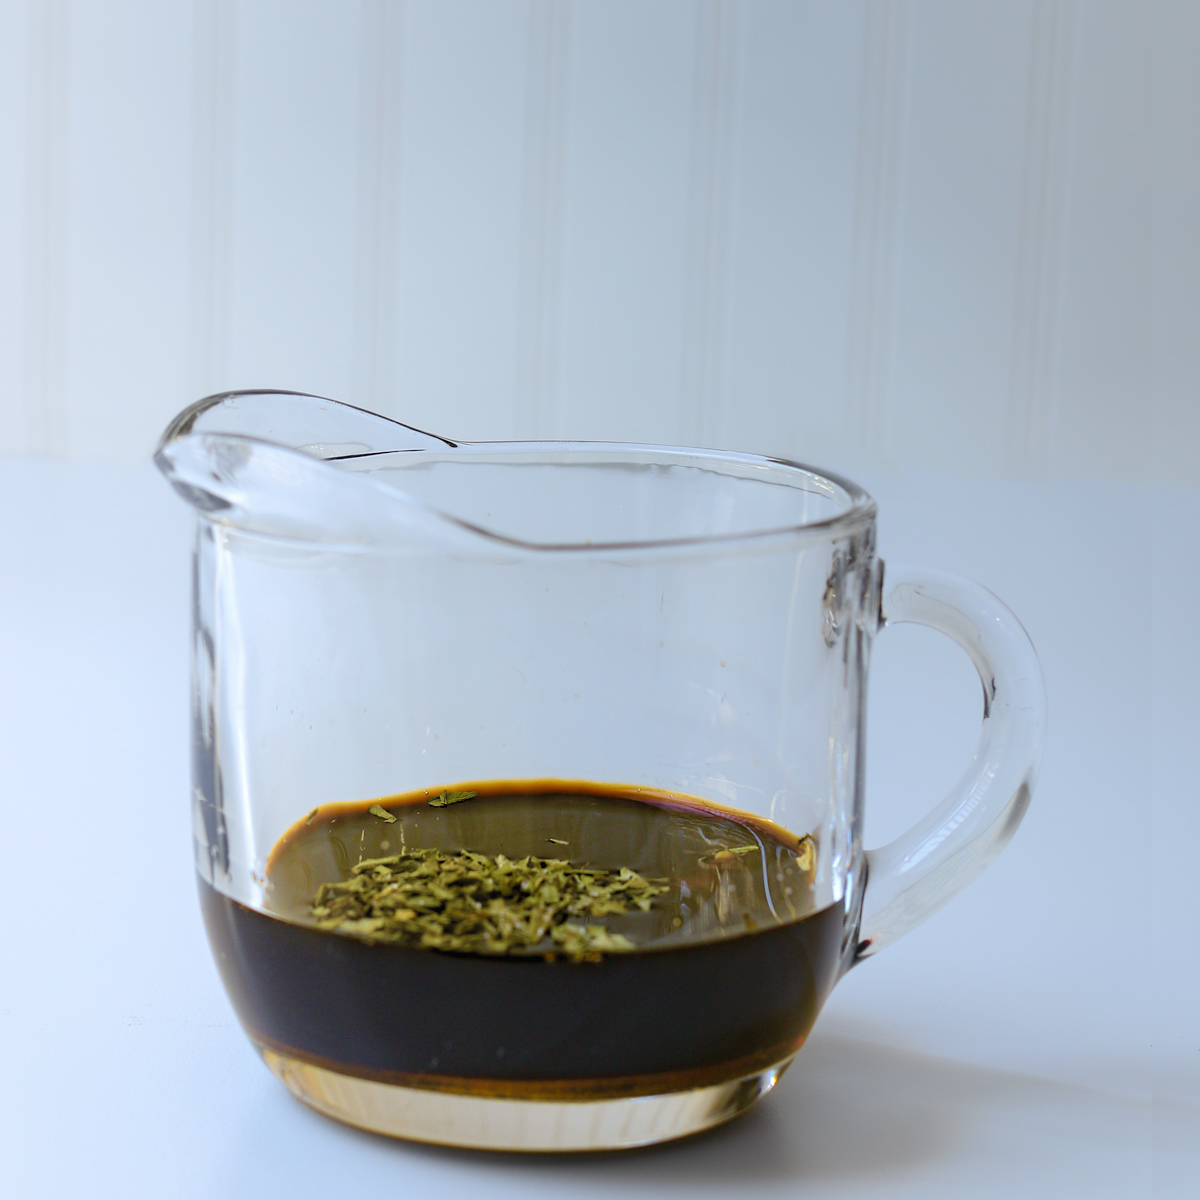 vinegar, mustard, maple, tarragon, and spices in small glass pitcher.